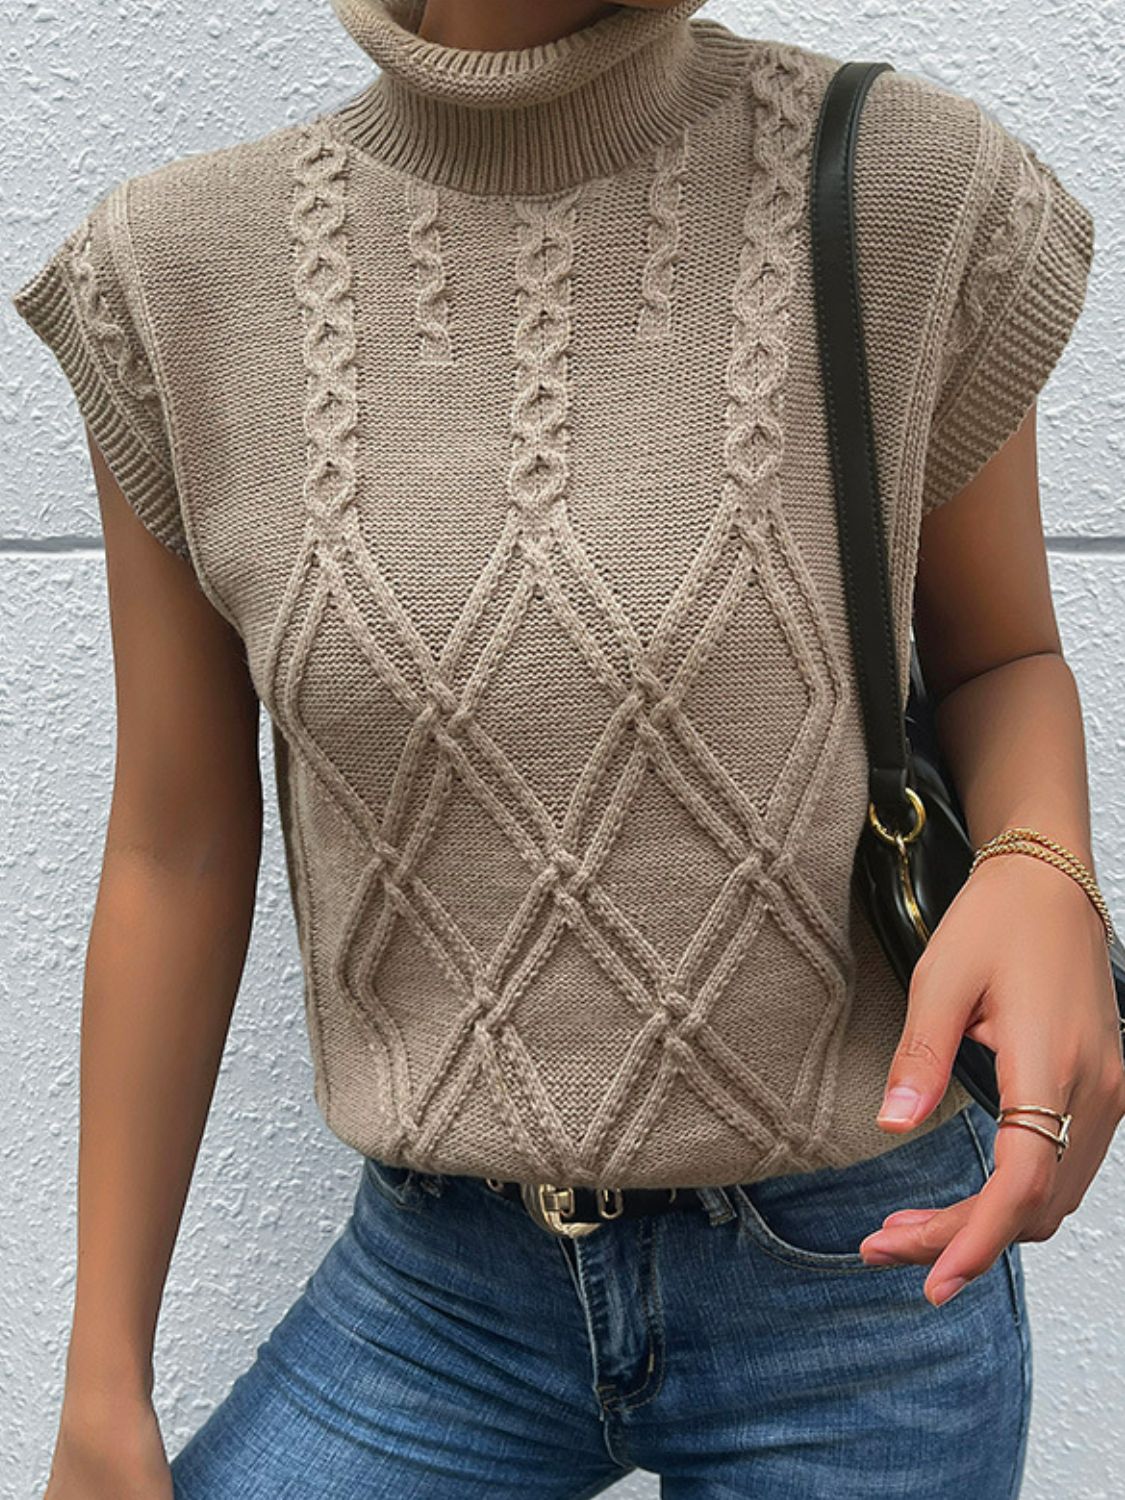 Mixed Knit Turtleneck Sweater Vest  | KIKI COUTURE-Women's Clothing, Designer Fashions, Shoes, Bags